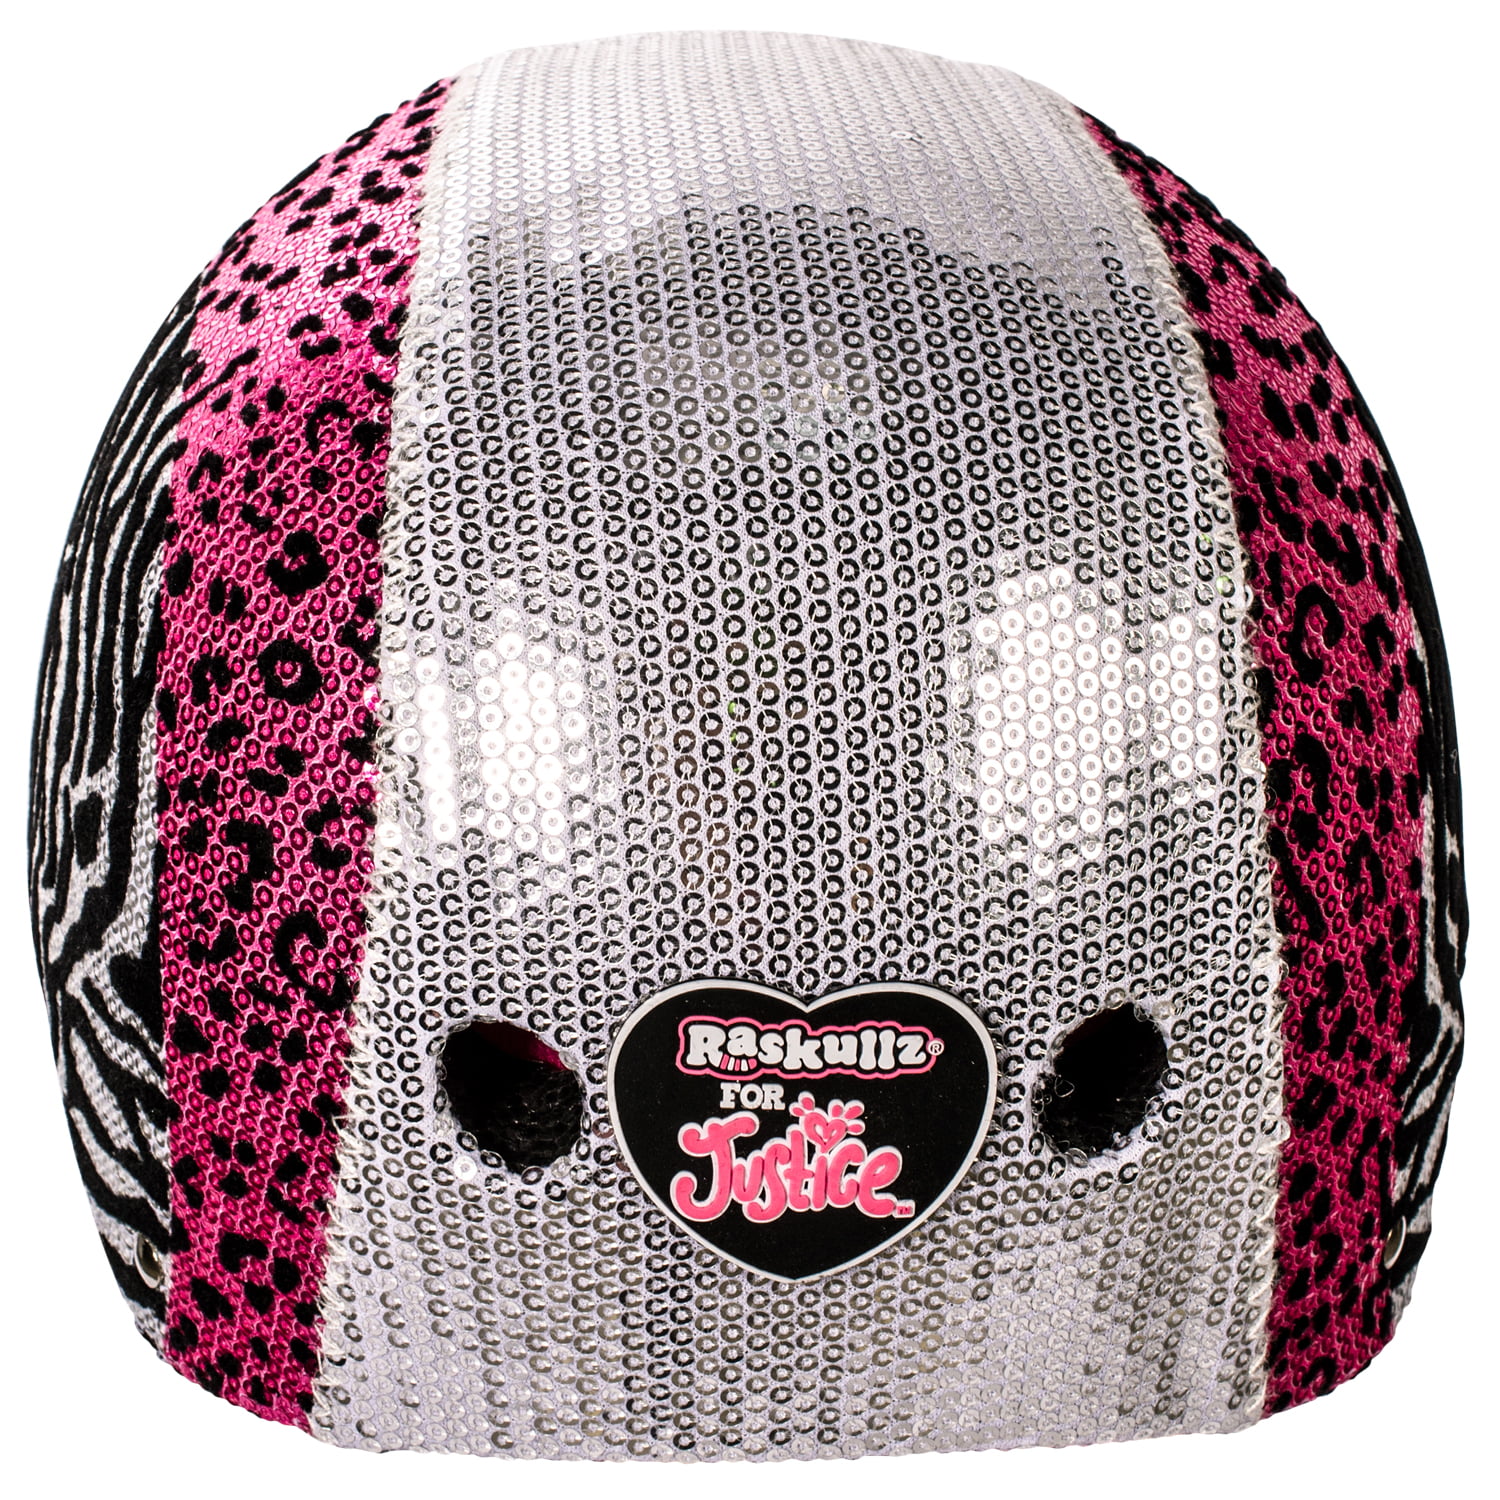 -On the Go Glam Gear Helmet Raskullz for Justice Sequins Pink Leopard Ages 5+ S 